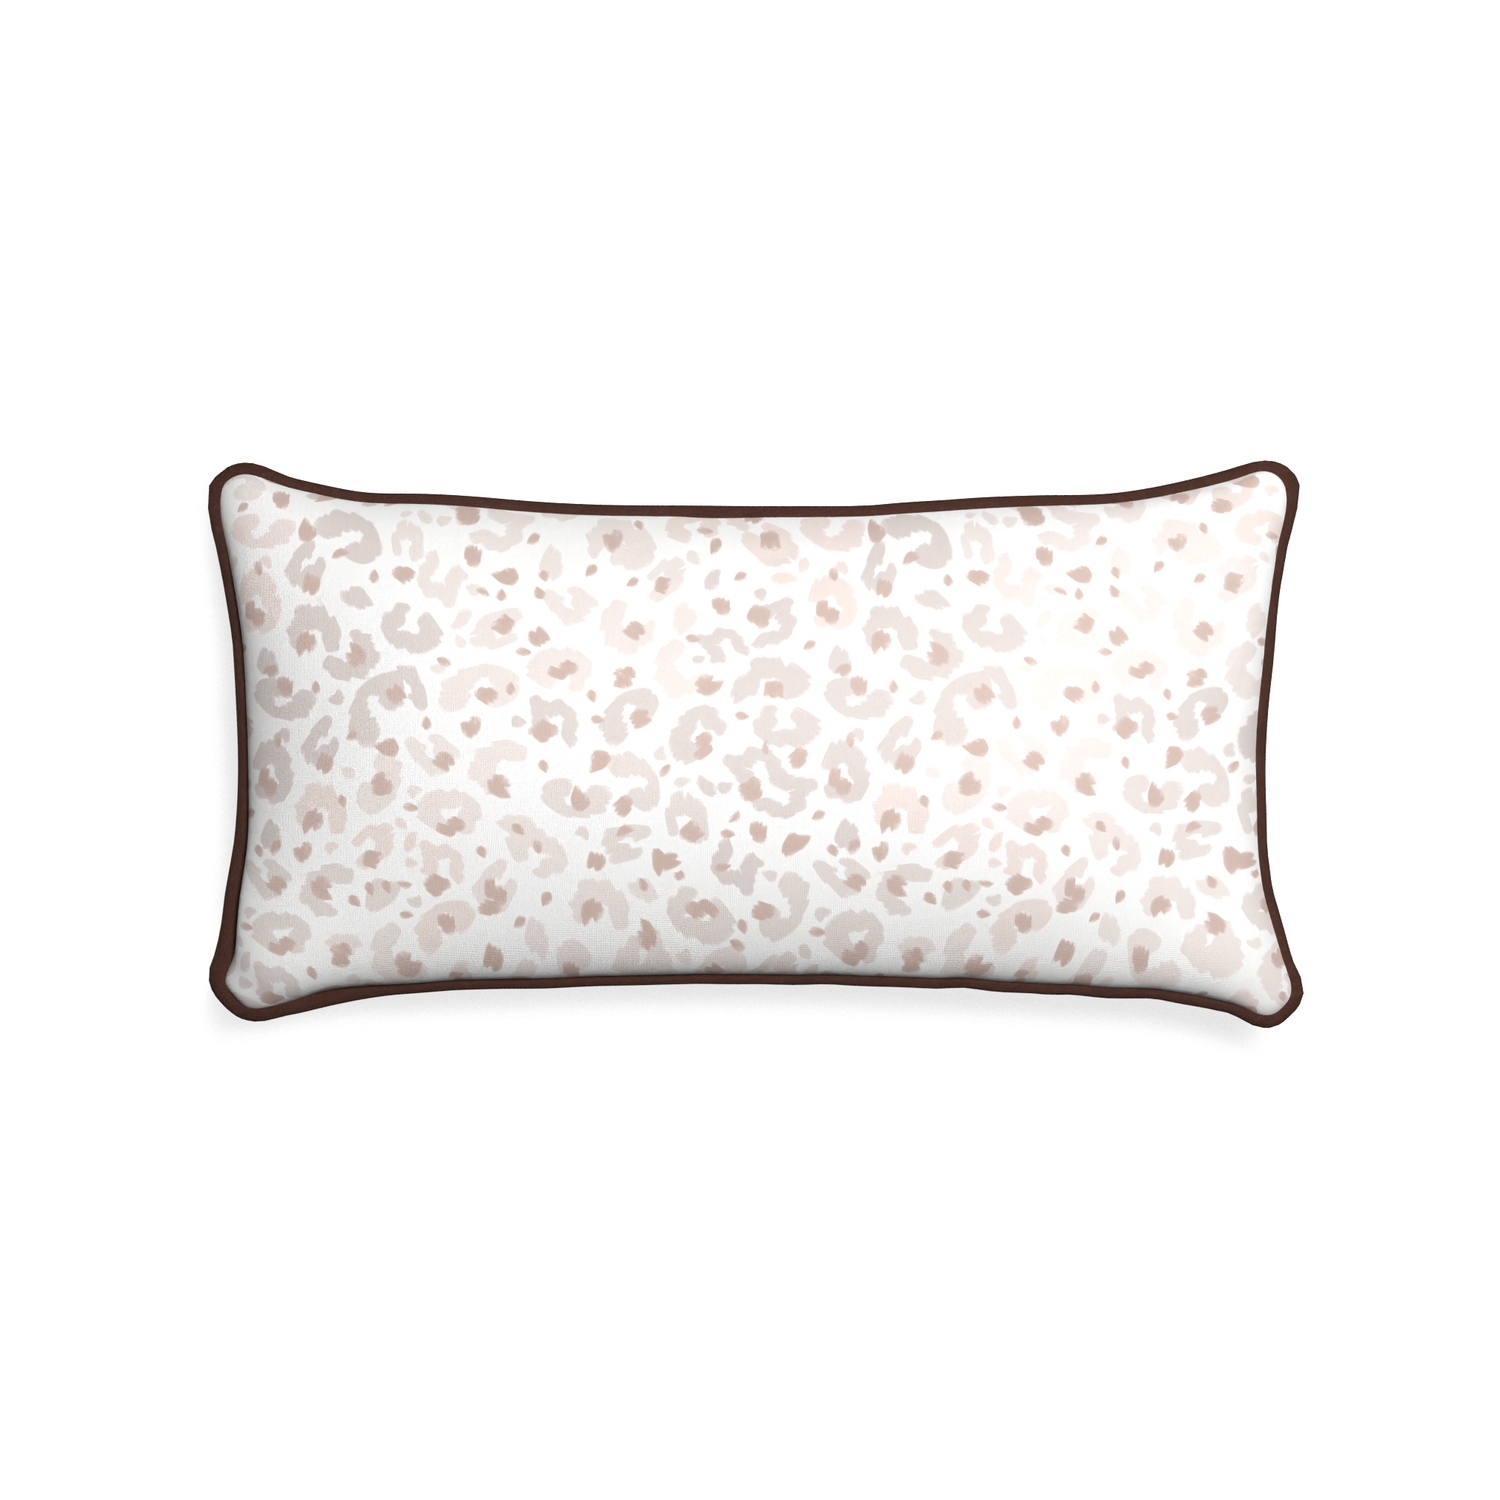 Midi-lumbar rosie custom beige animal printpillow with w piping on white background